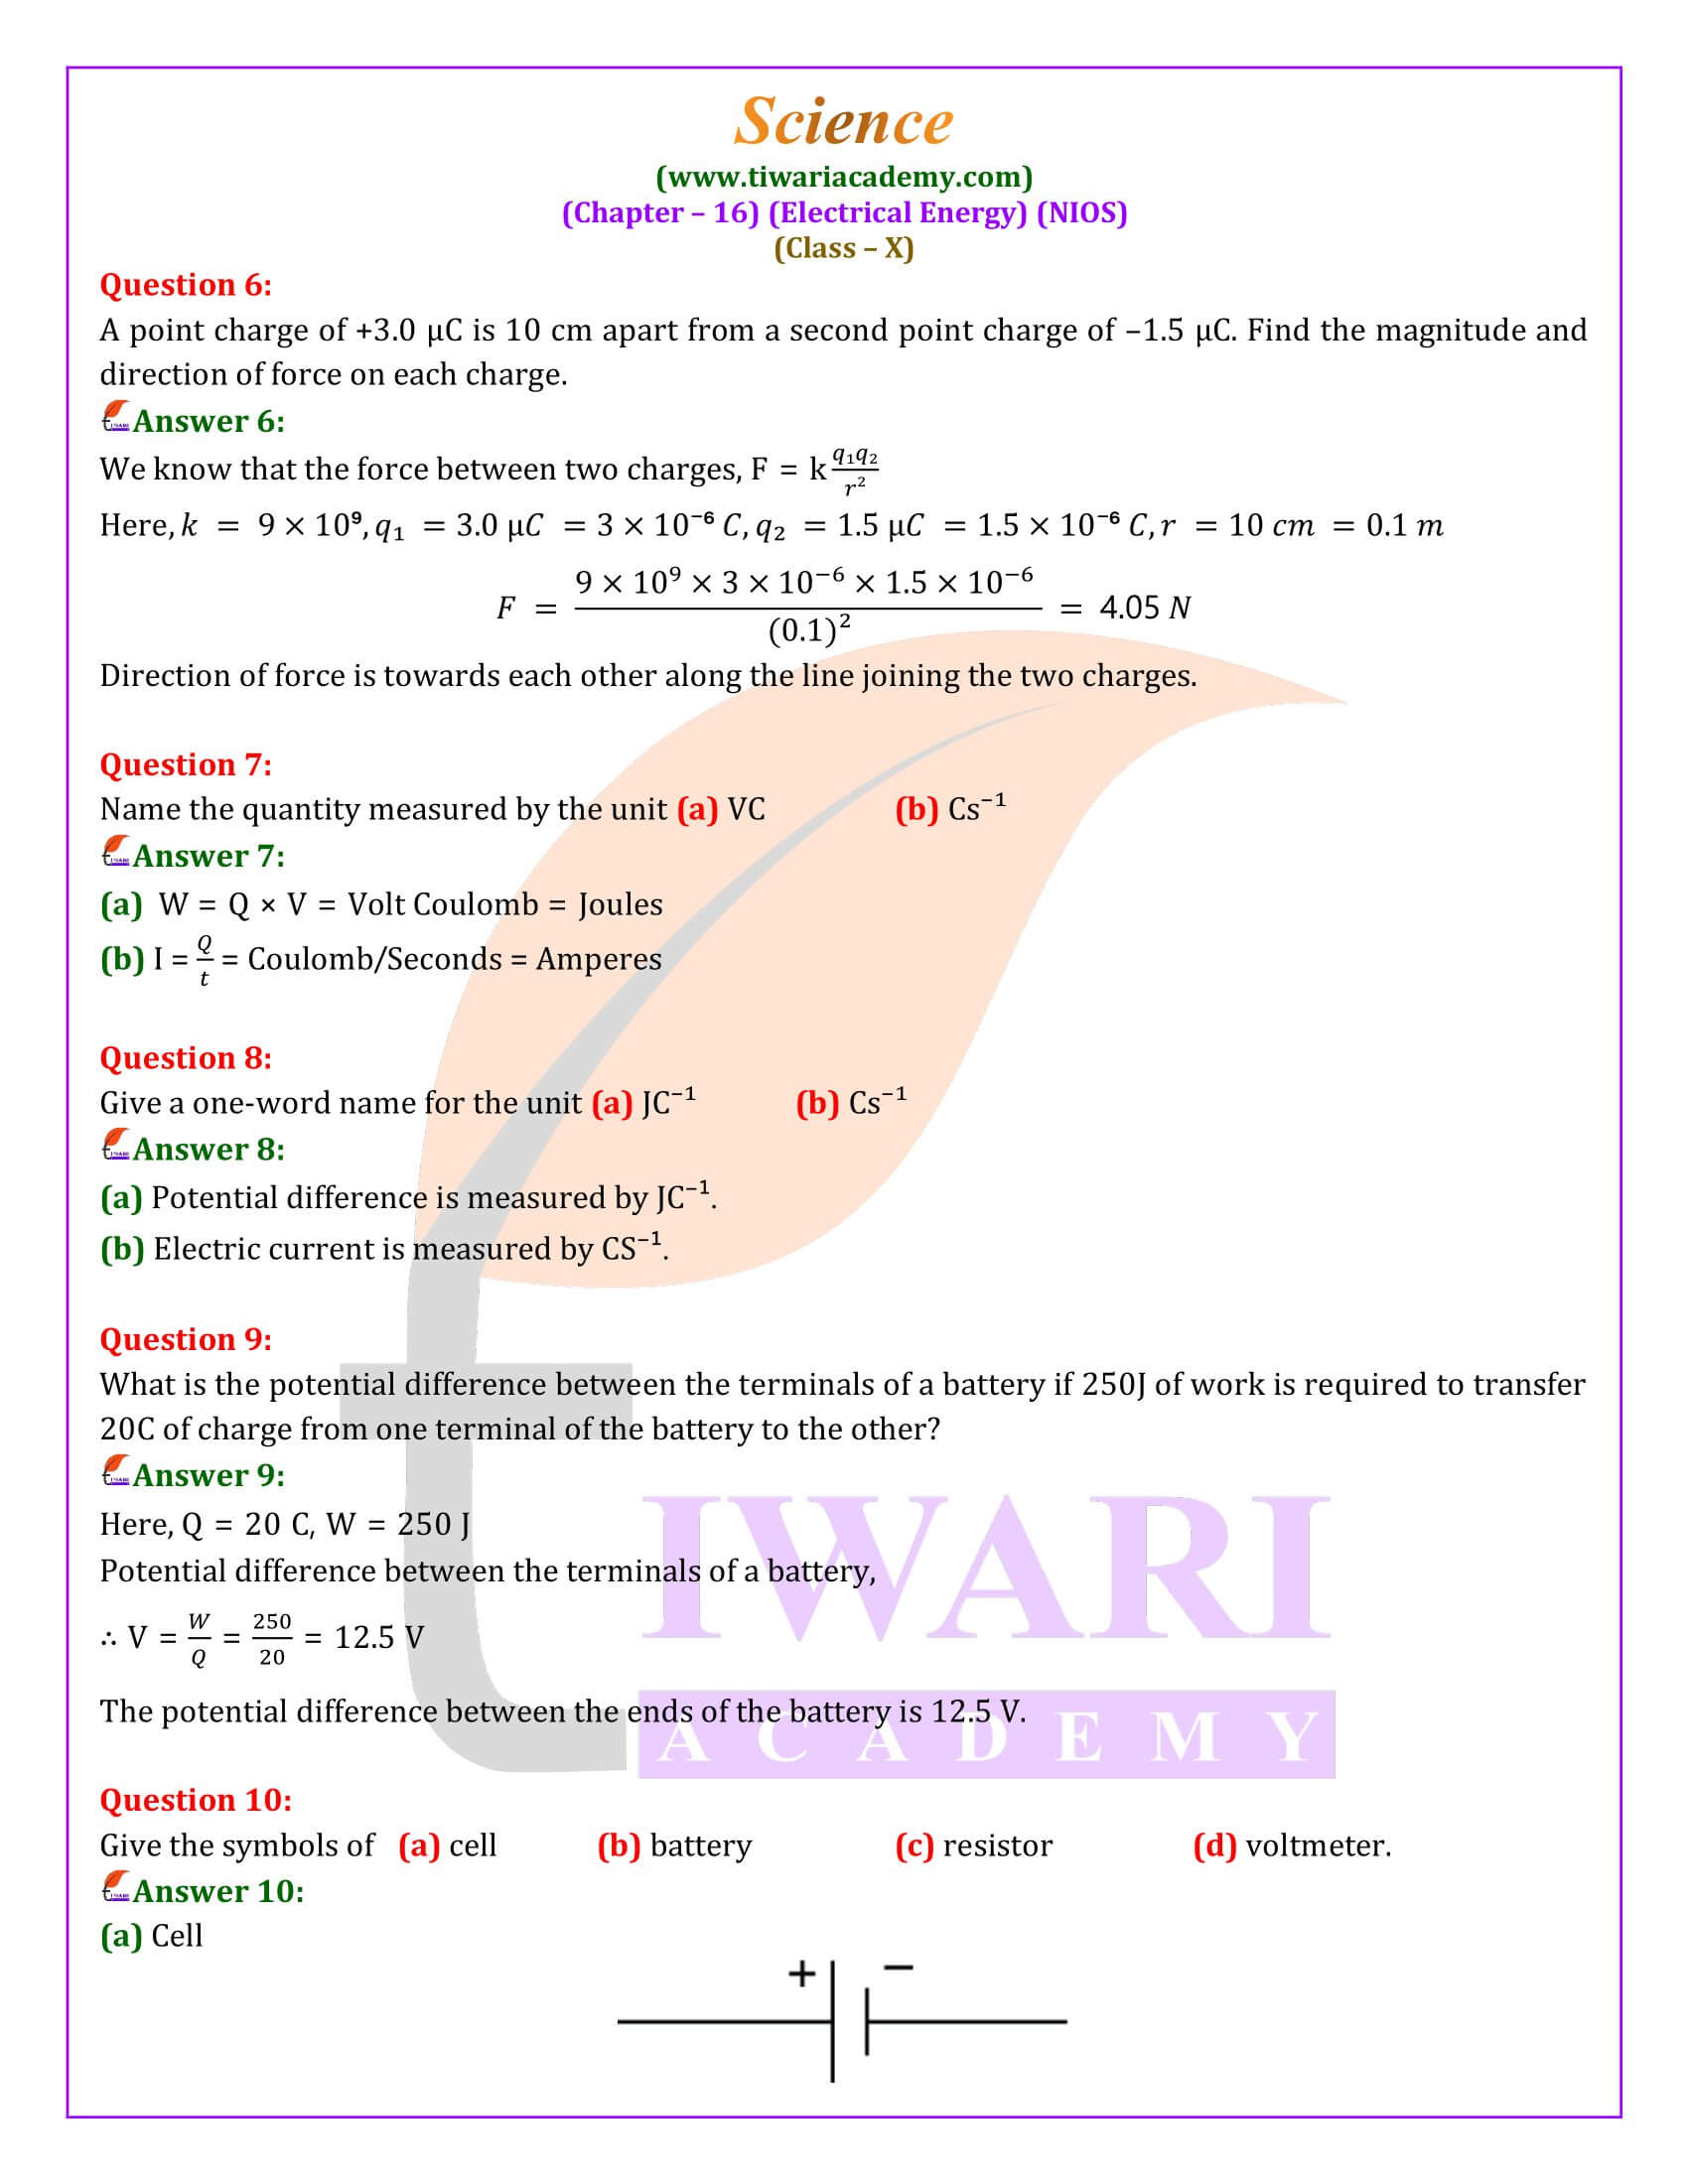 NIOS Class 10 Science Chapter 16 Guide